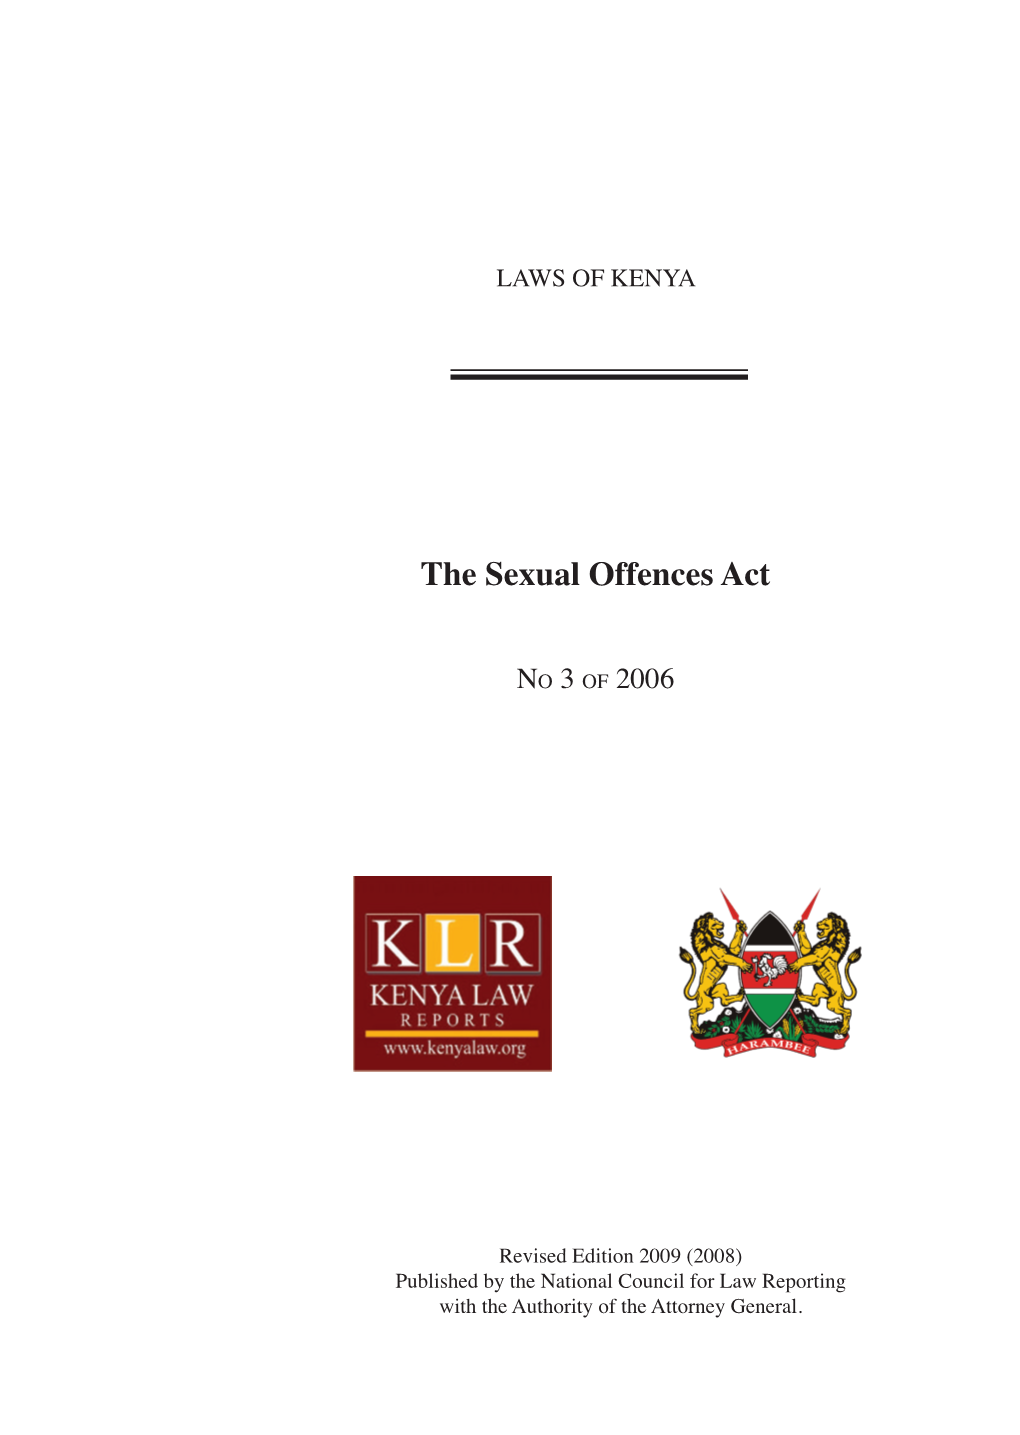 The Sexual Offences Act